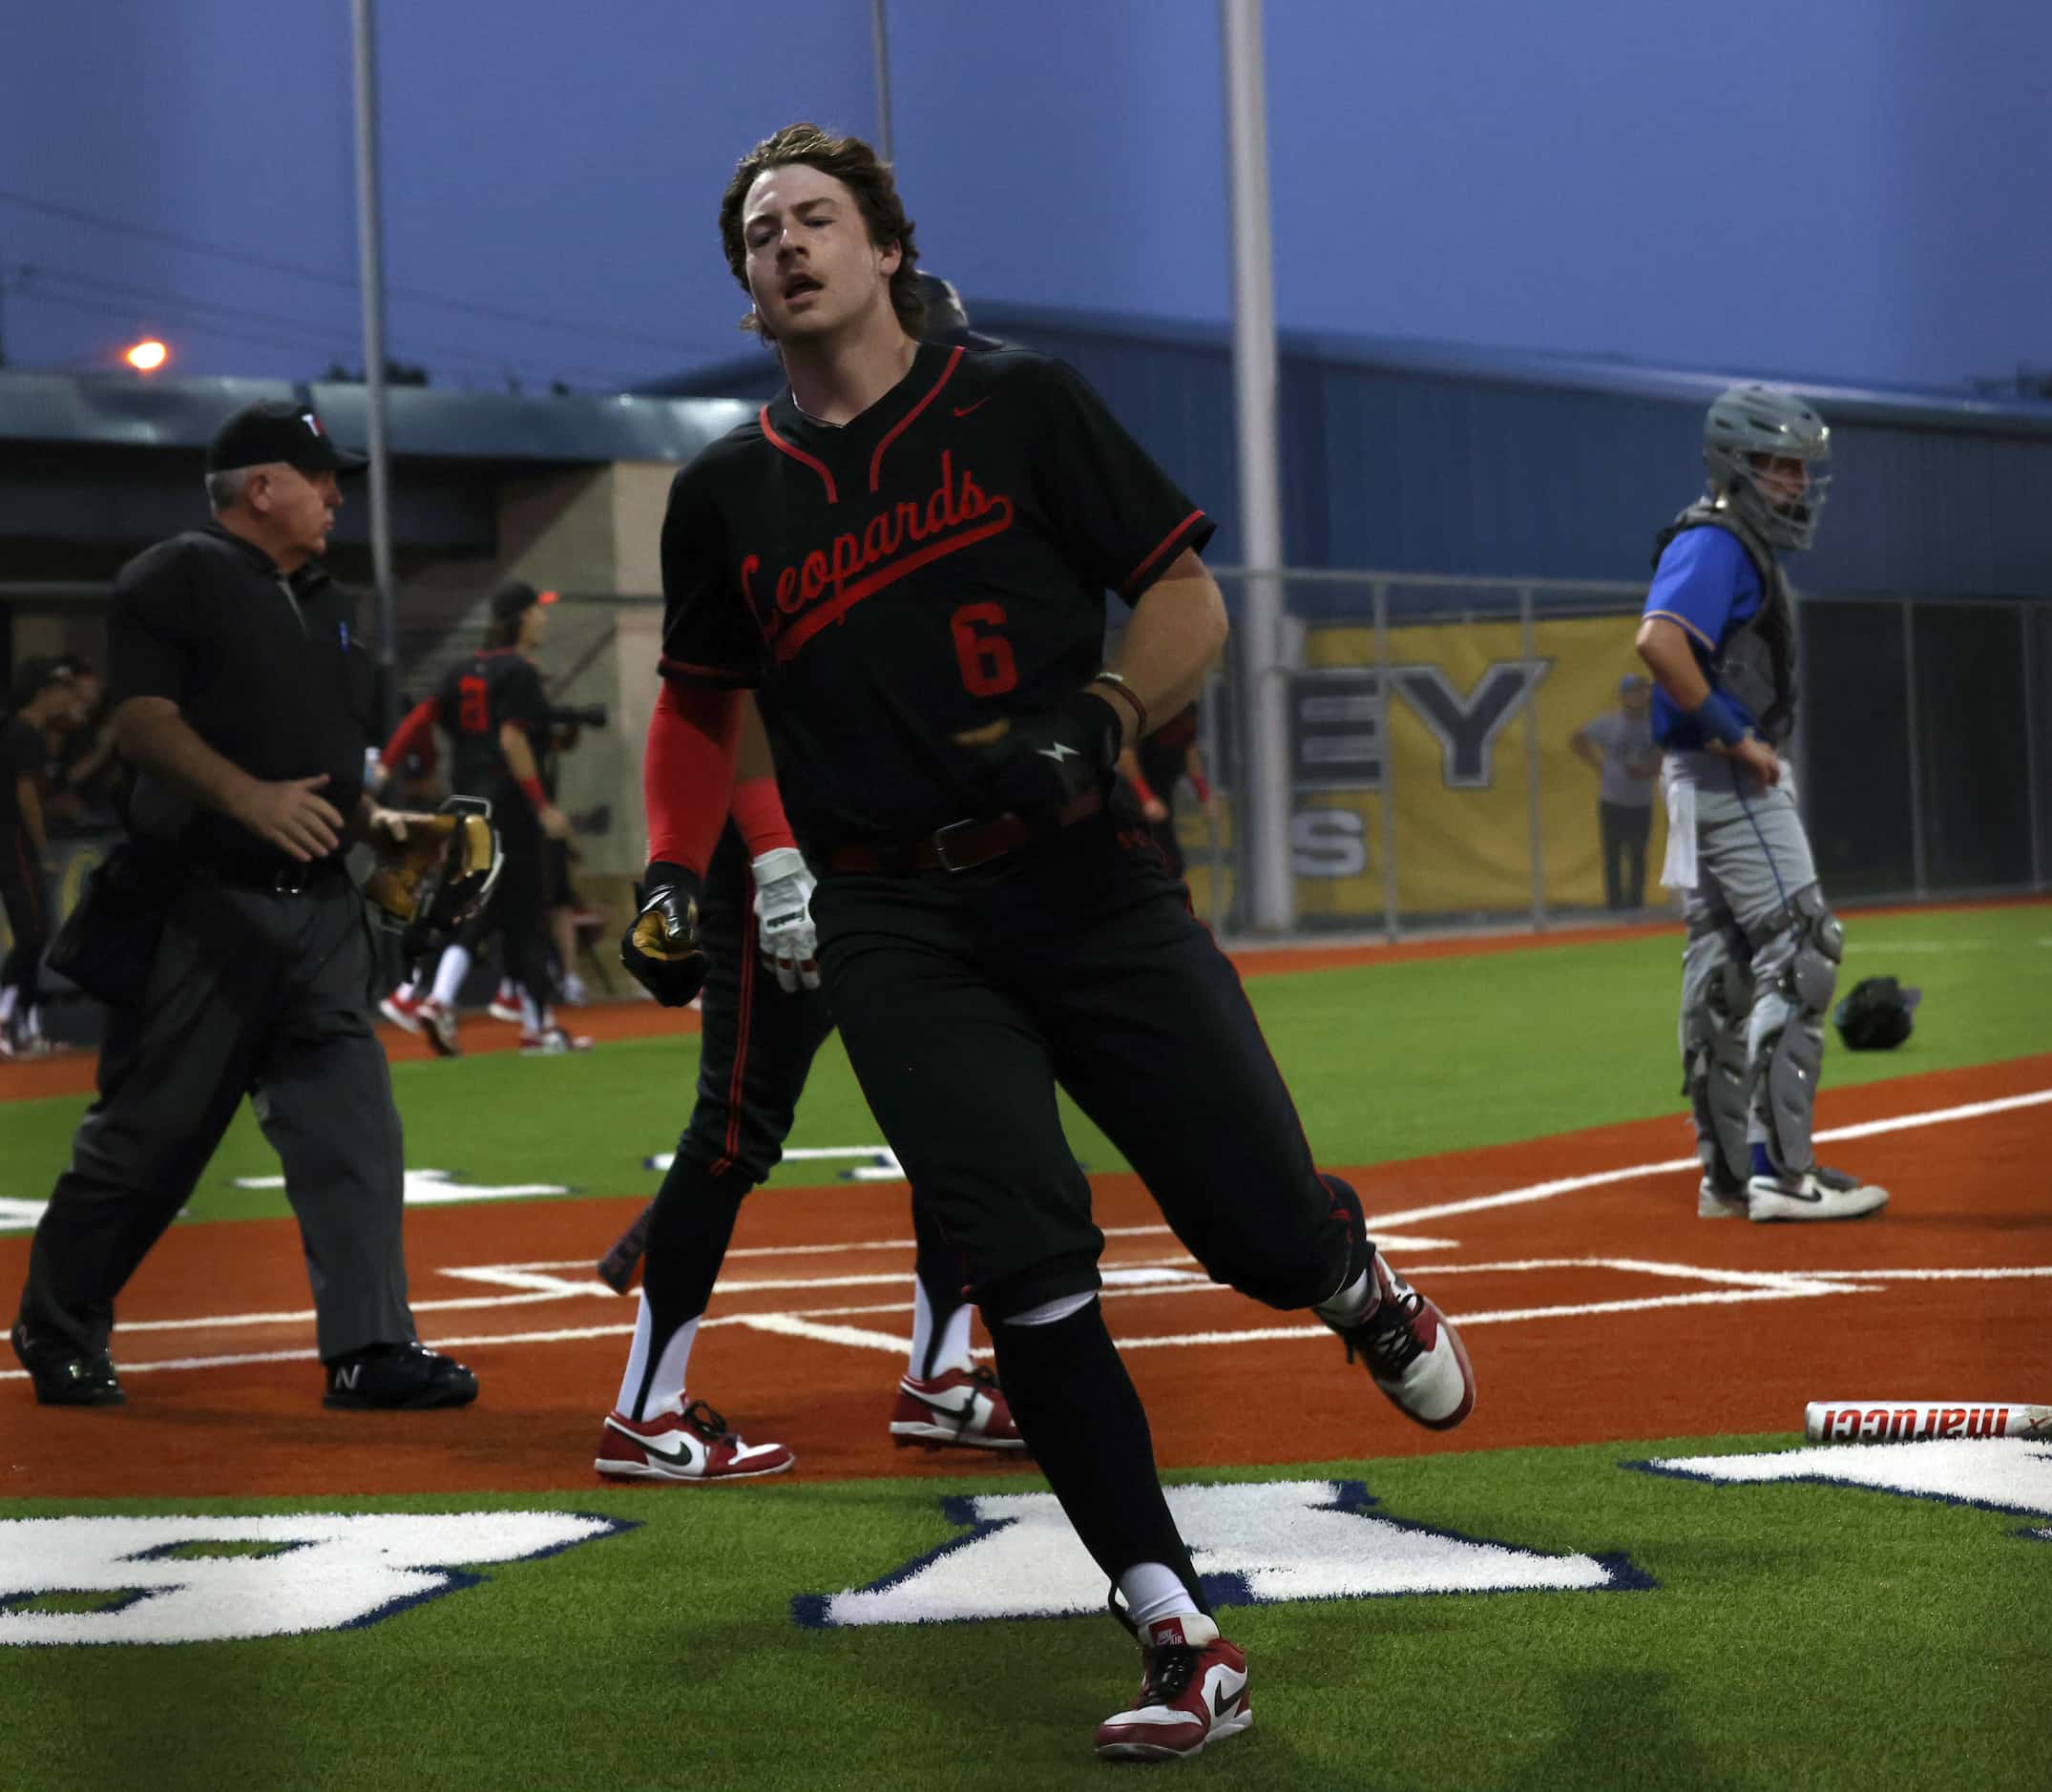 Lovejoy's Asher Lacy (6) scores during the bottom of the 3rd inning of play against Frisco....